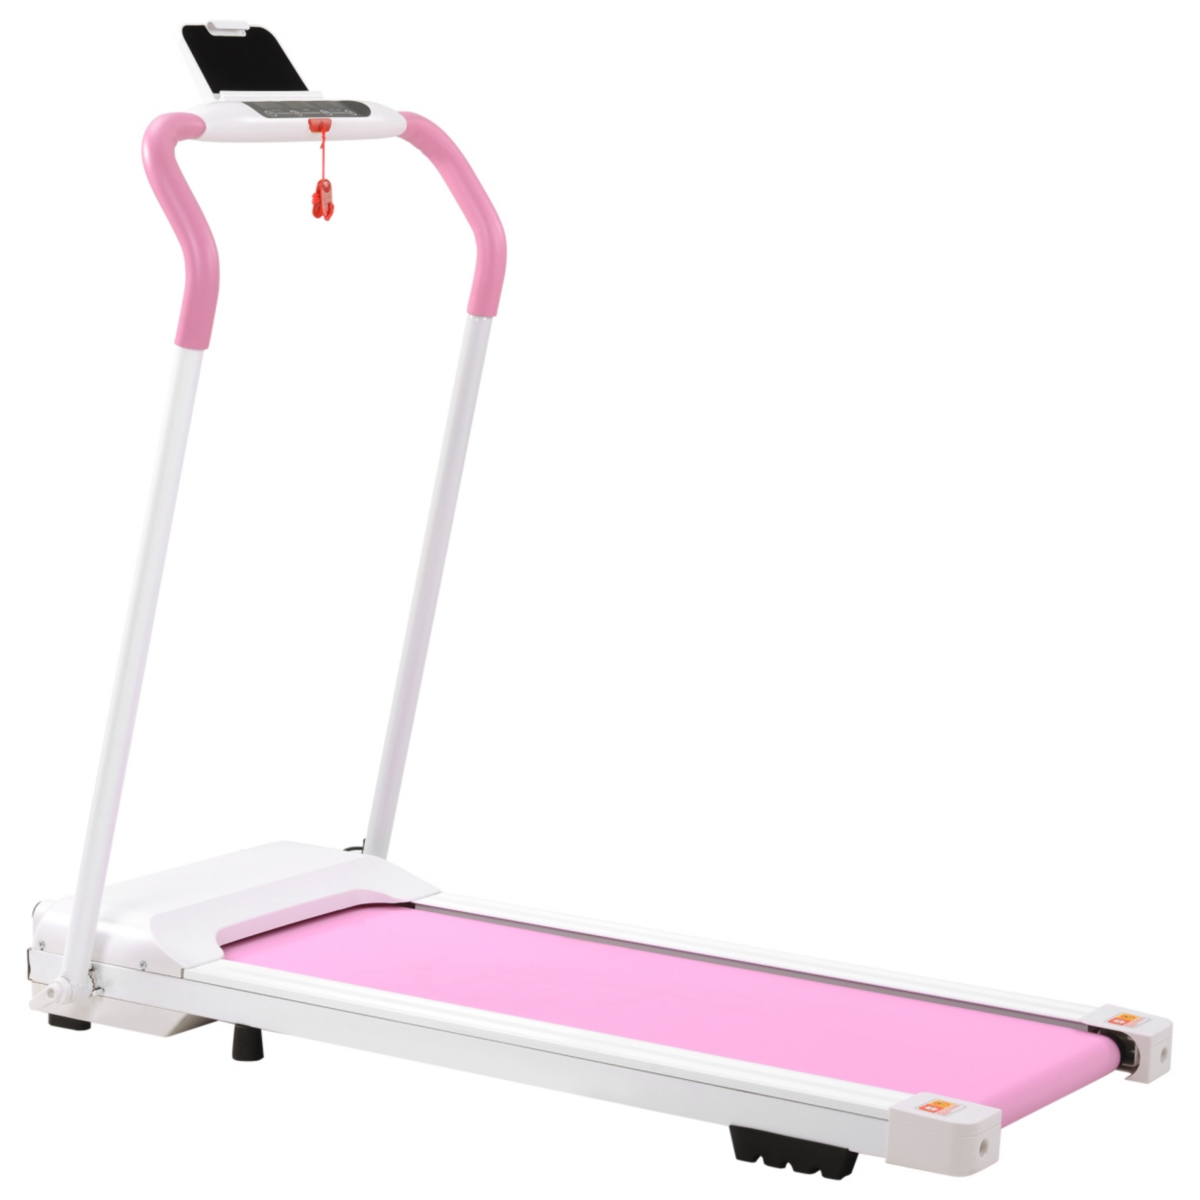 Treadmill Folding Treadmill For Home Portable Electric Motorized Treadmill Running Exercise Machine Compact Treadmill For Home Gym Fitness